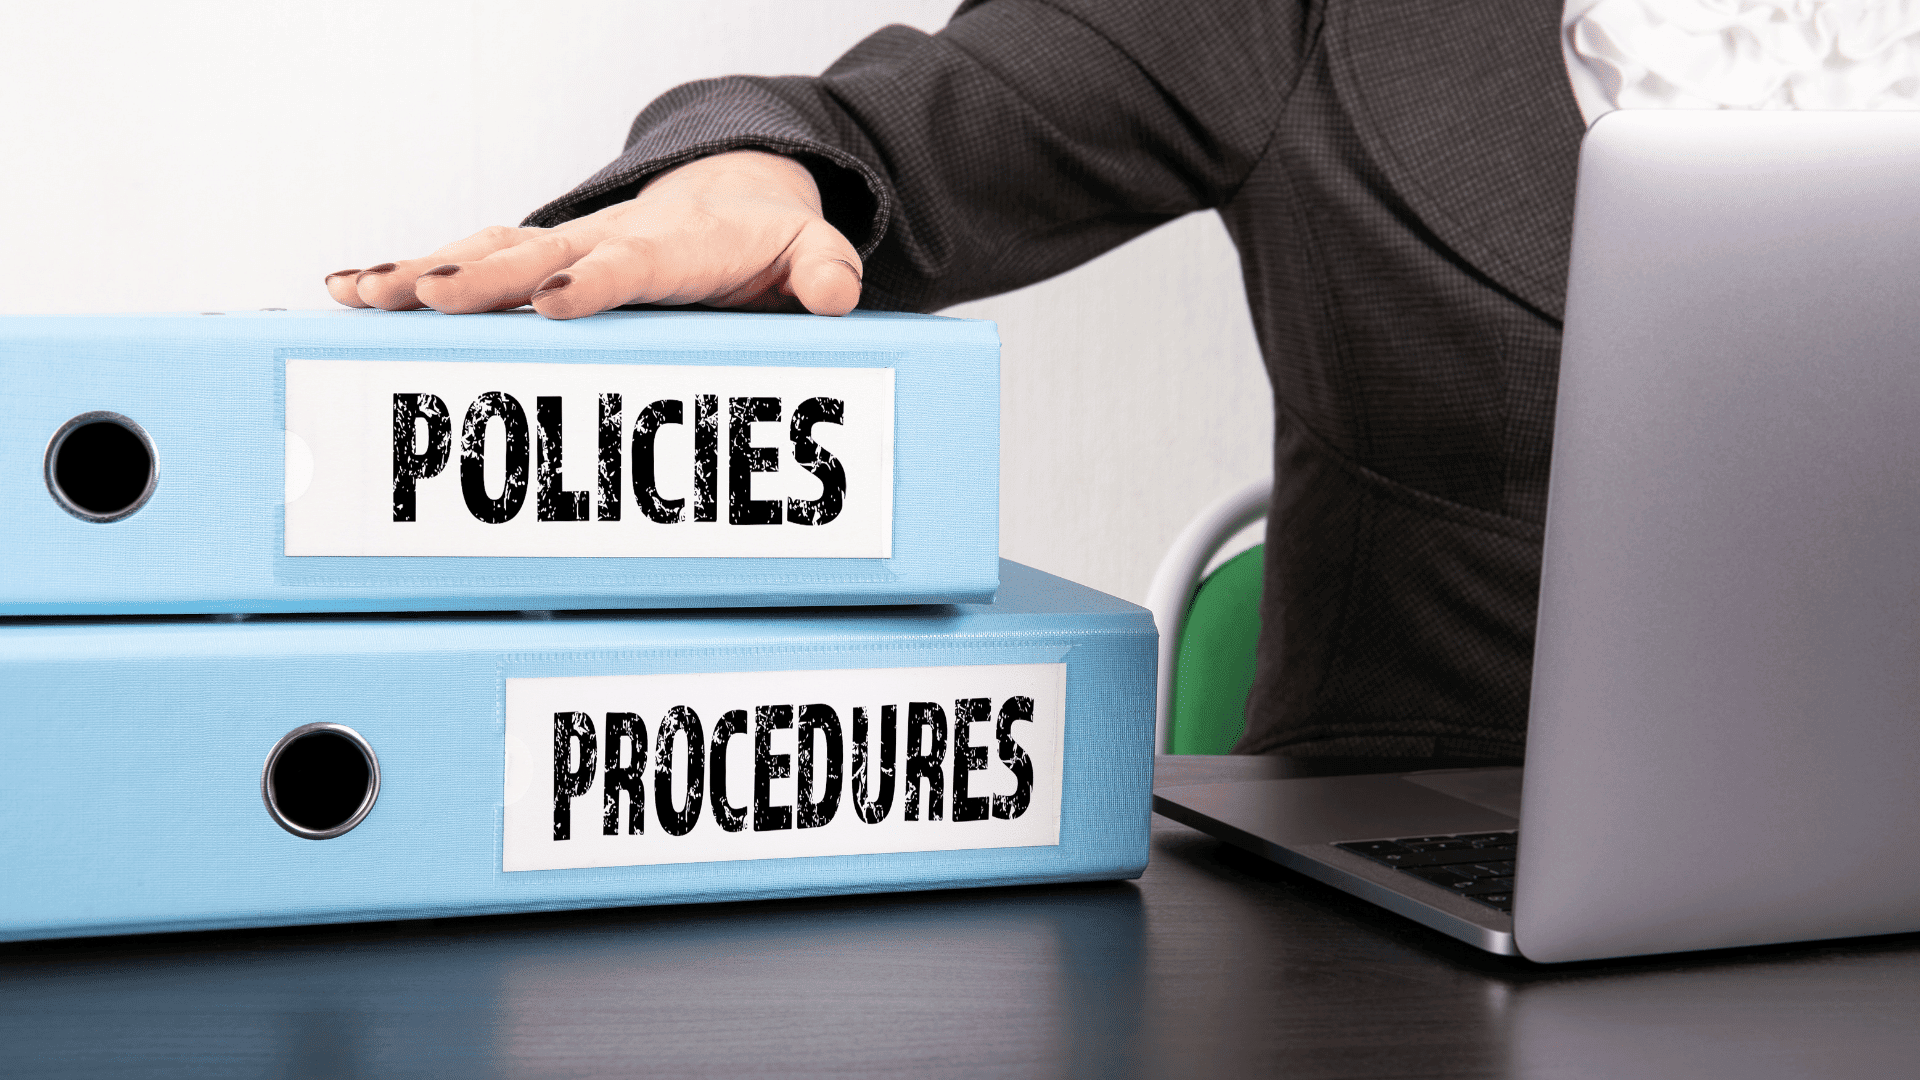 Human Resources Policies And Procedures - What You Need No Know